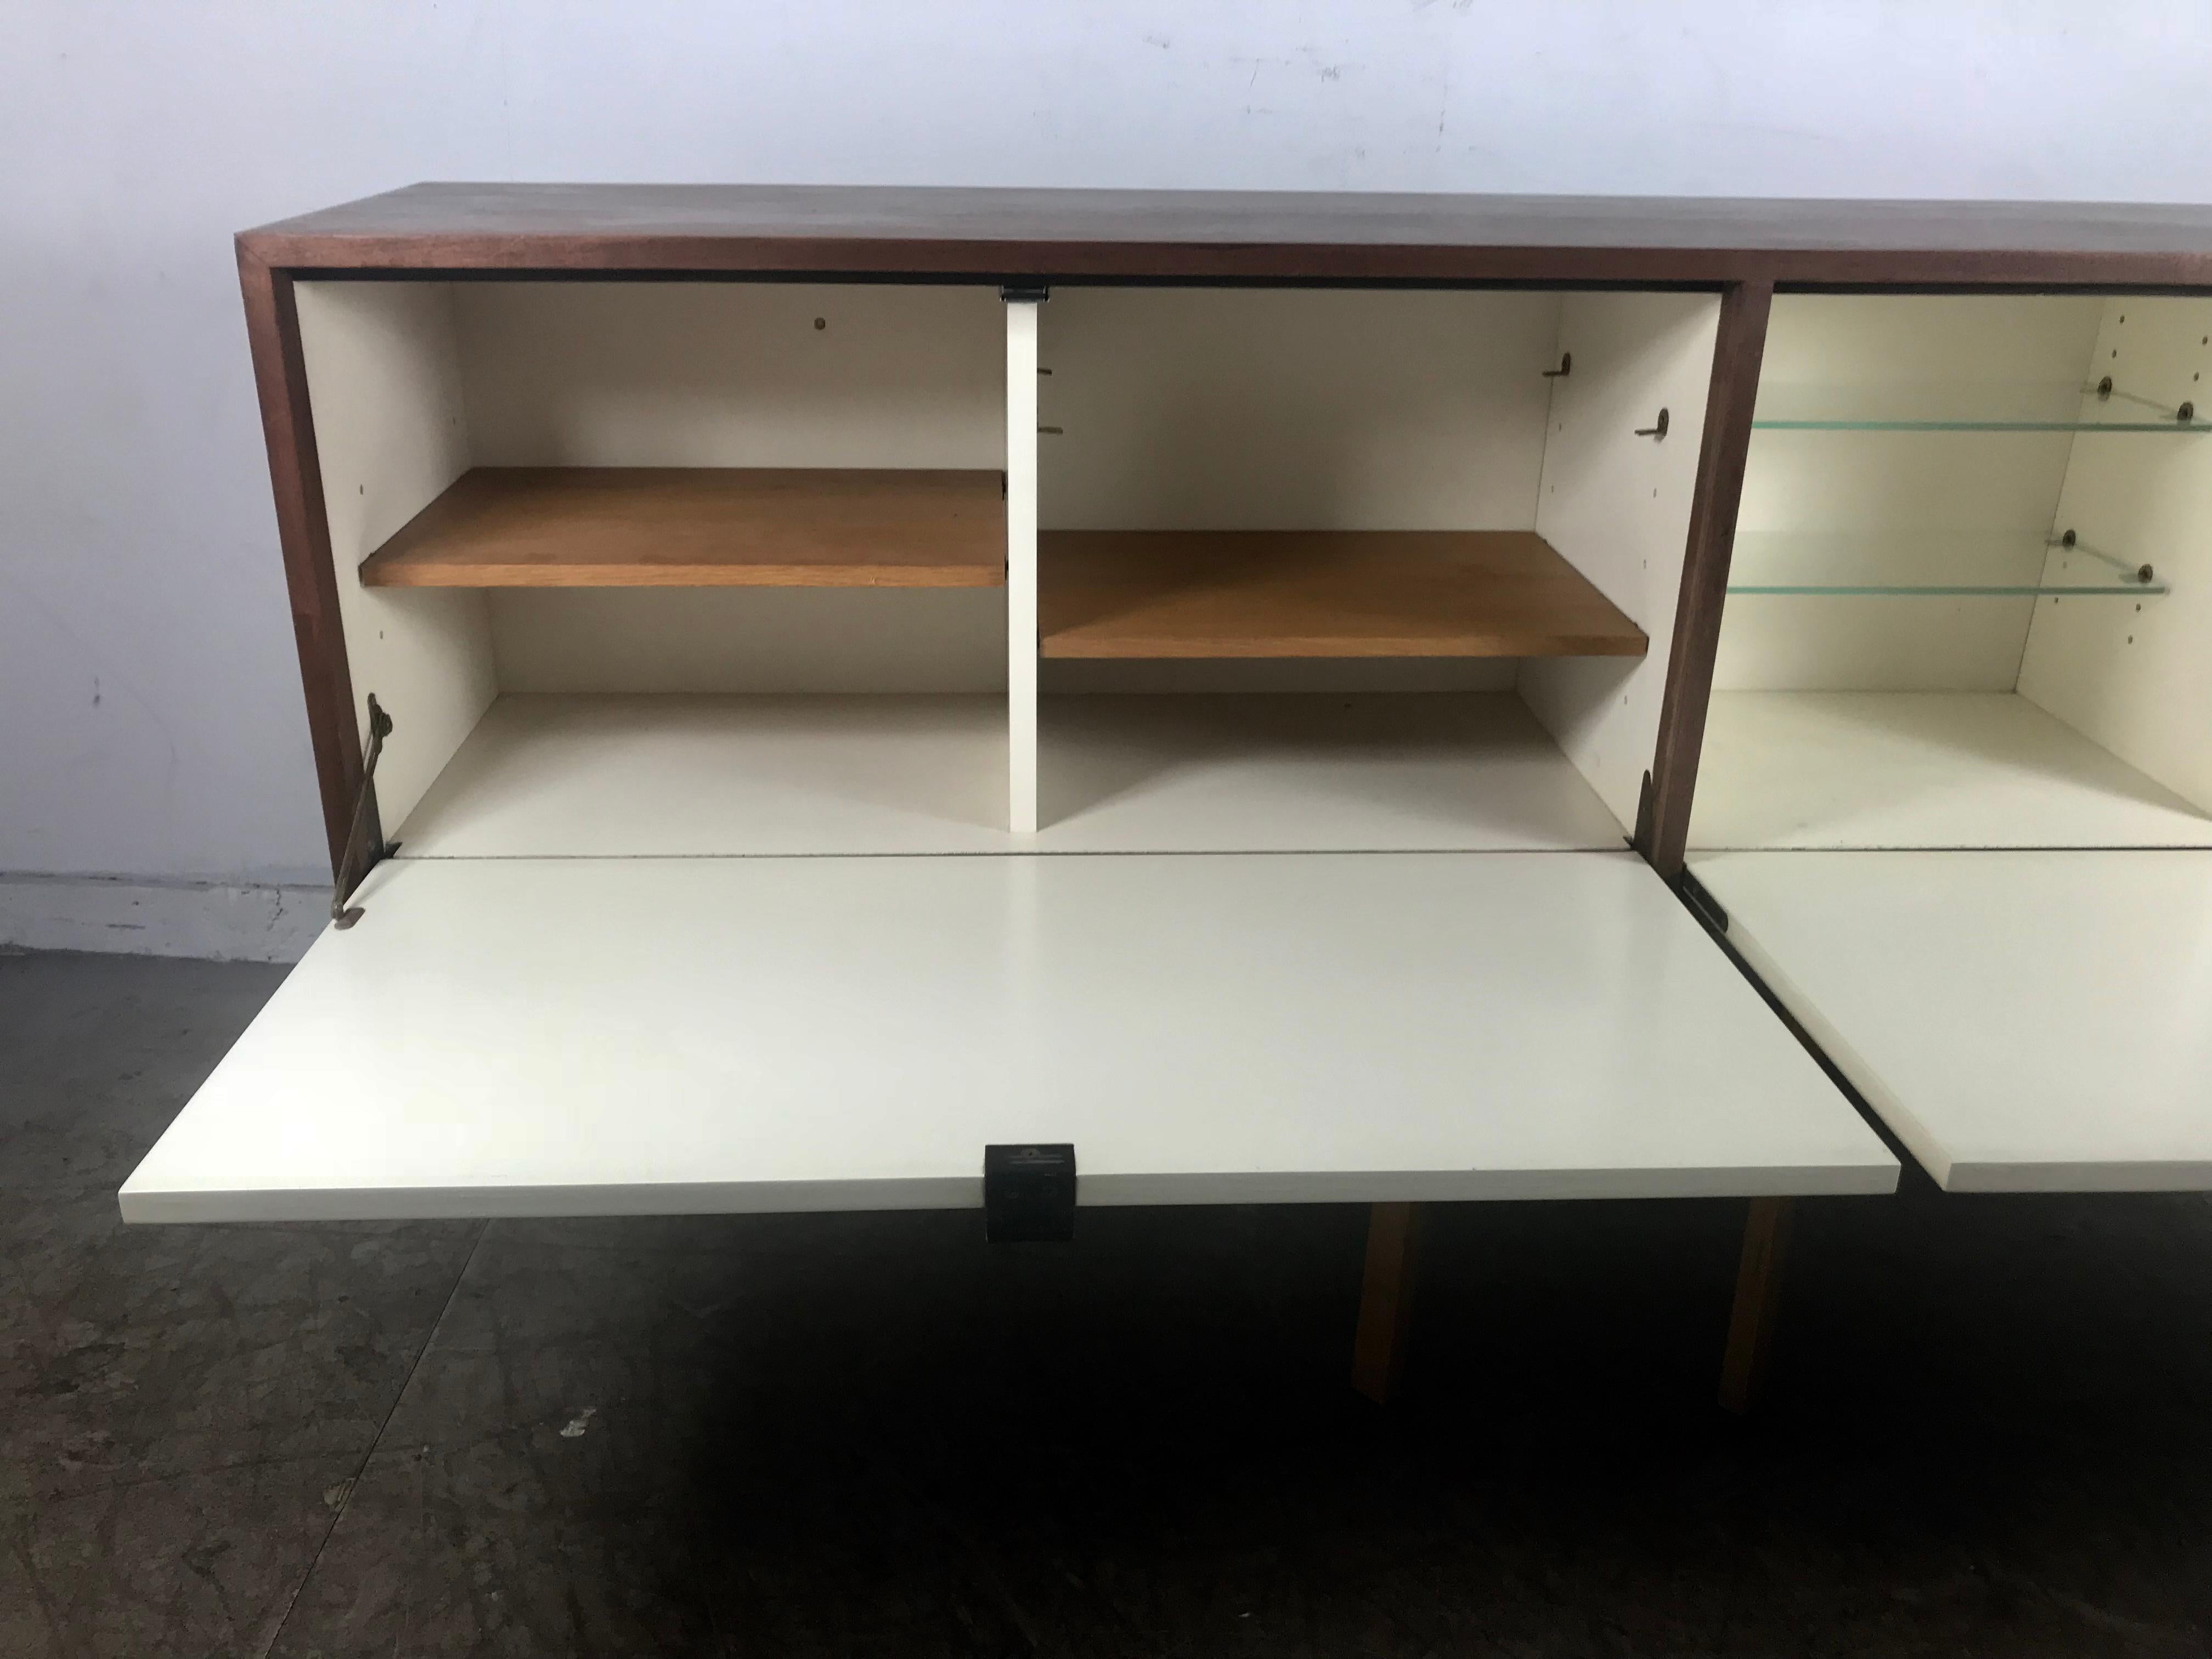 Early Florence Knoll for Knoll NY wall hung credenza or bar, walnut finish, white lacquer drop down doors, original leather pulls, featuring two oak shelves and two glass shelves. Hand delivery avail to New York City or anywhere en route from